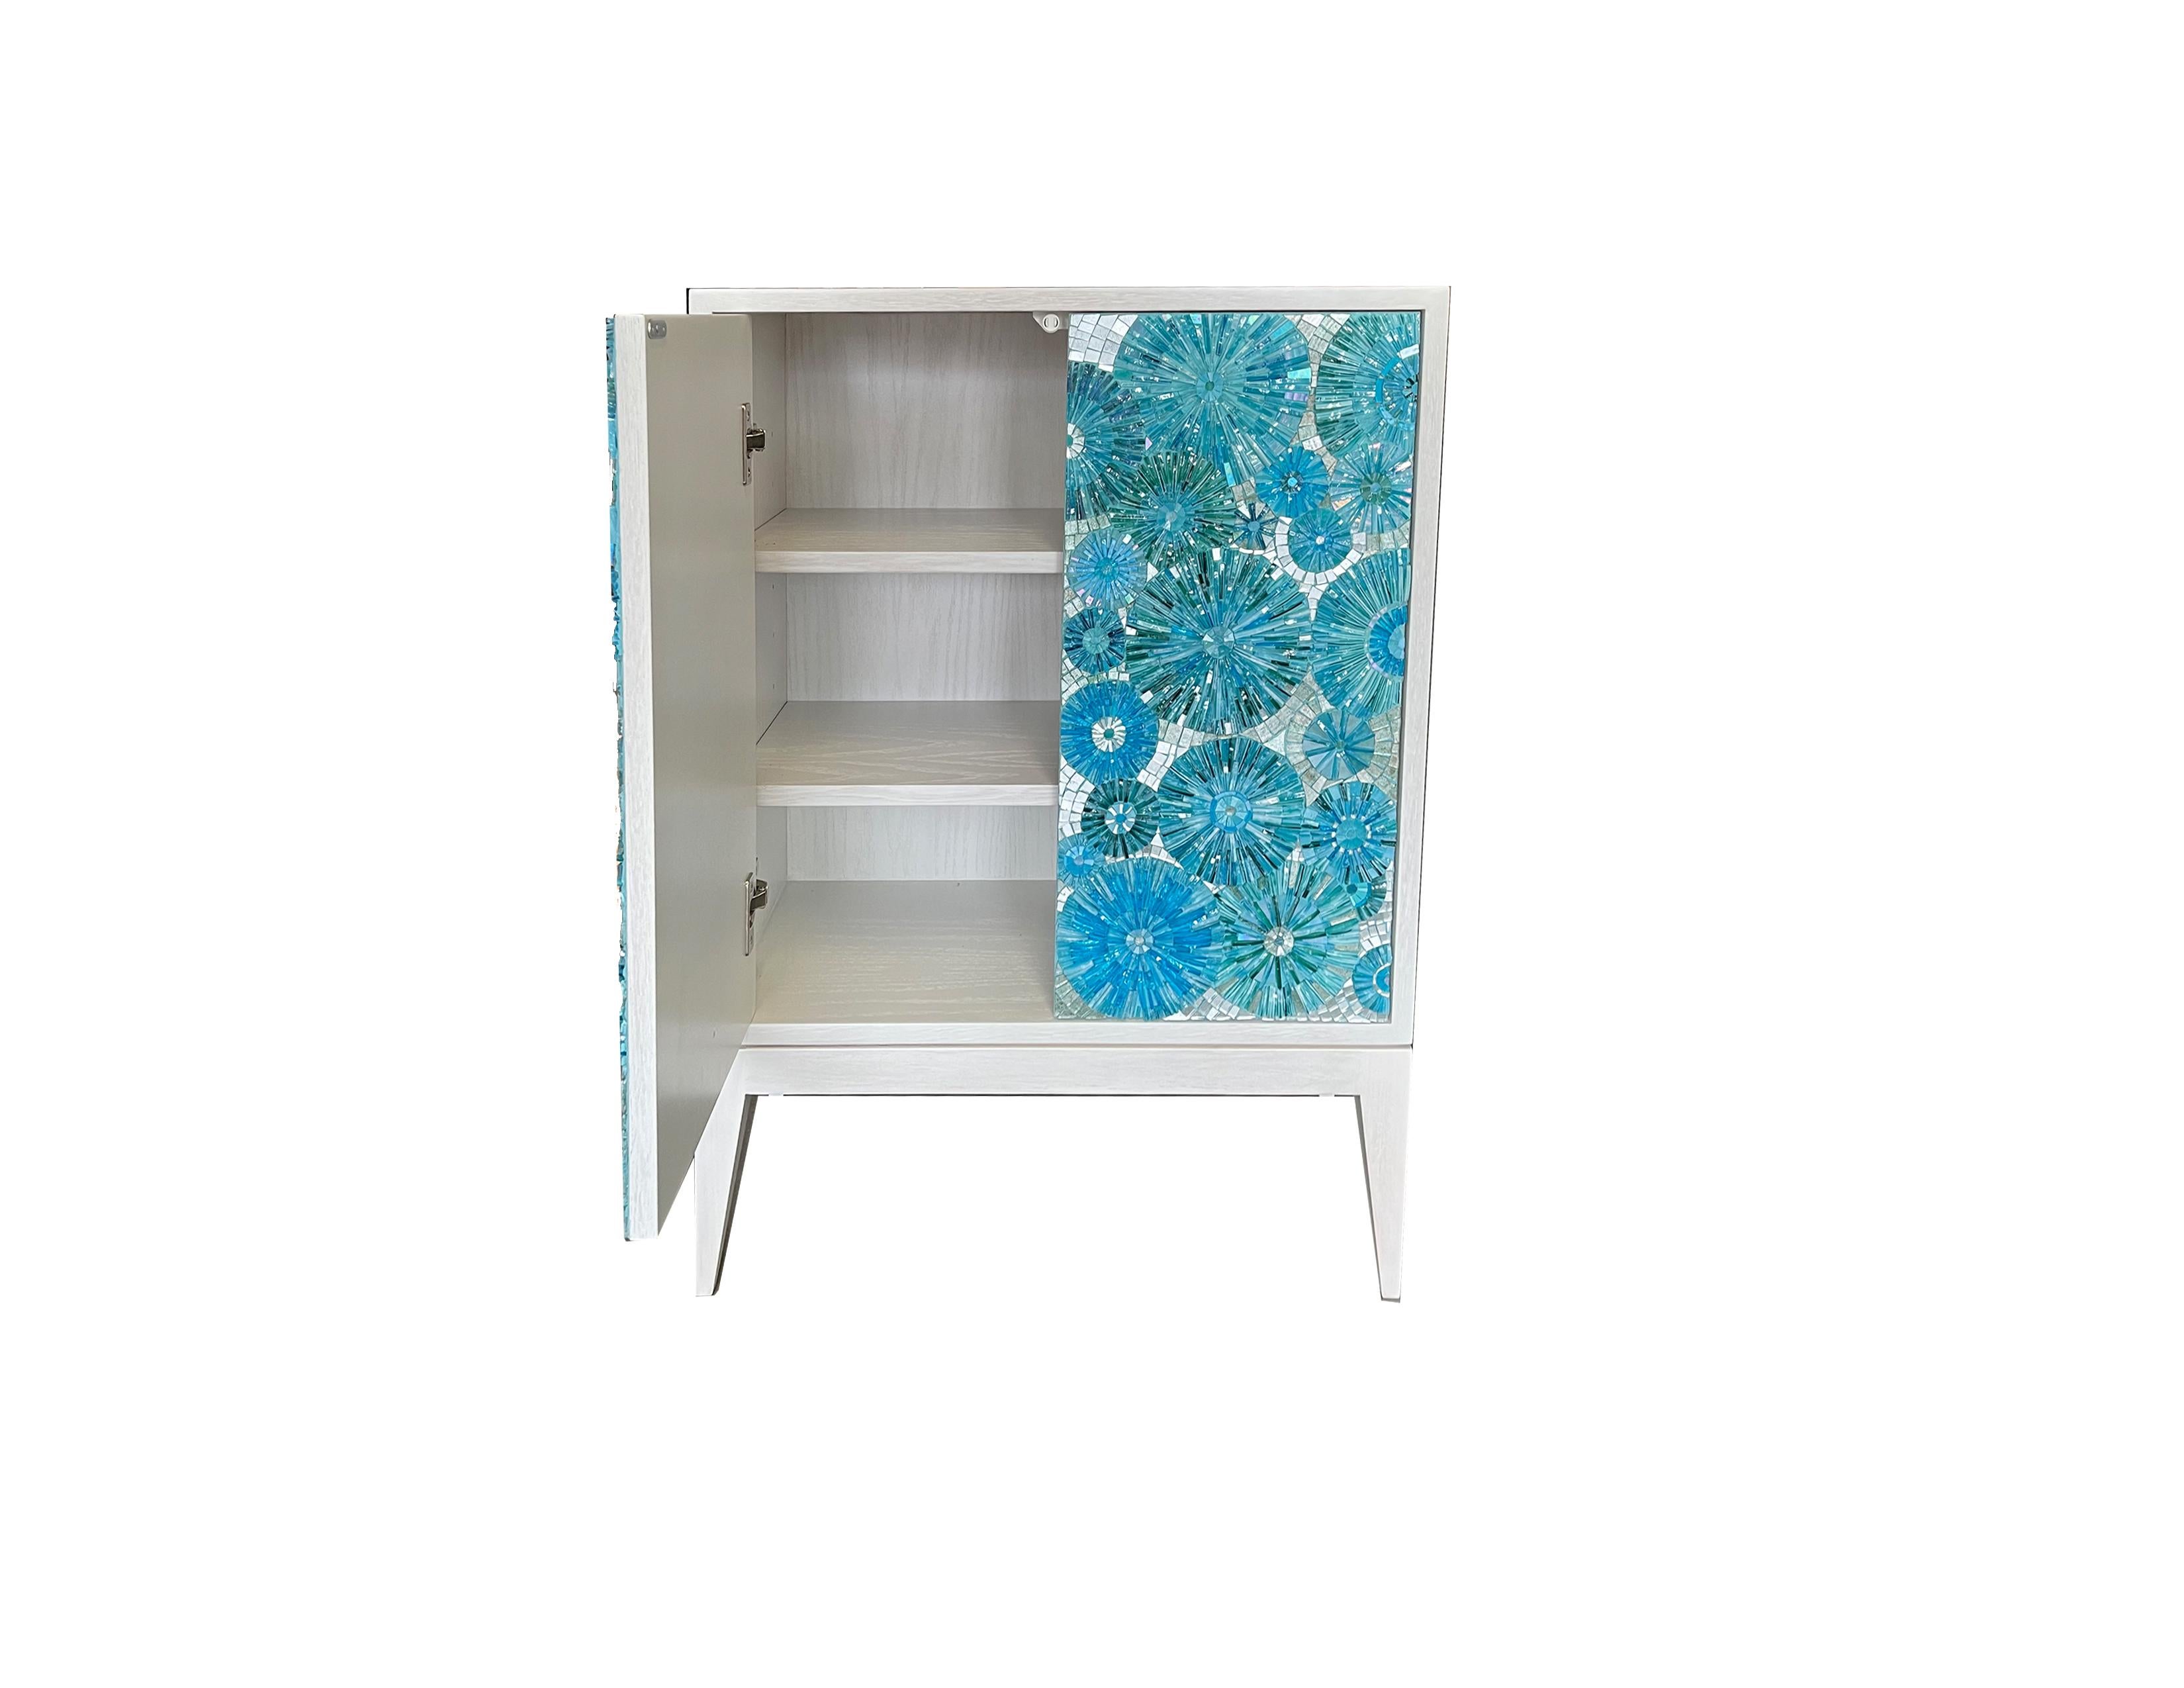 Our custom Blossom 2-door blossom cabinet is the perfect mini storage addition to any space! Consisting of one compartment with two adjustable shelves on its interior. The exterior is made up of our classic Milano legs in a soft washed-white wood